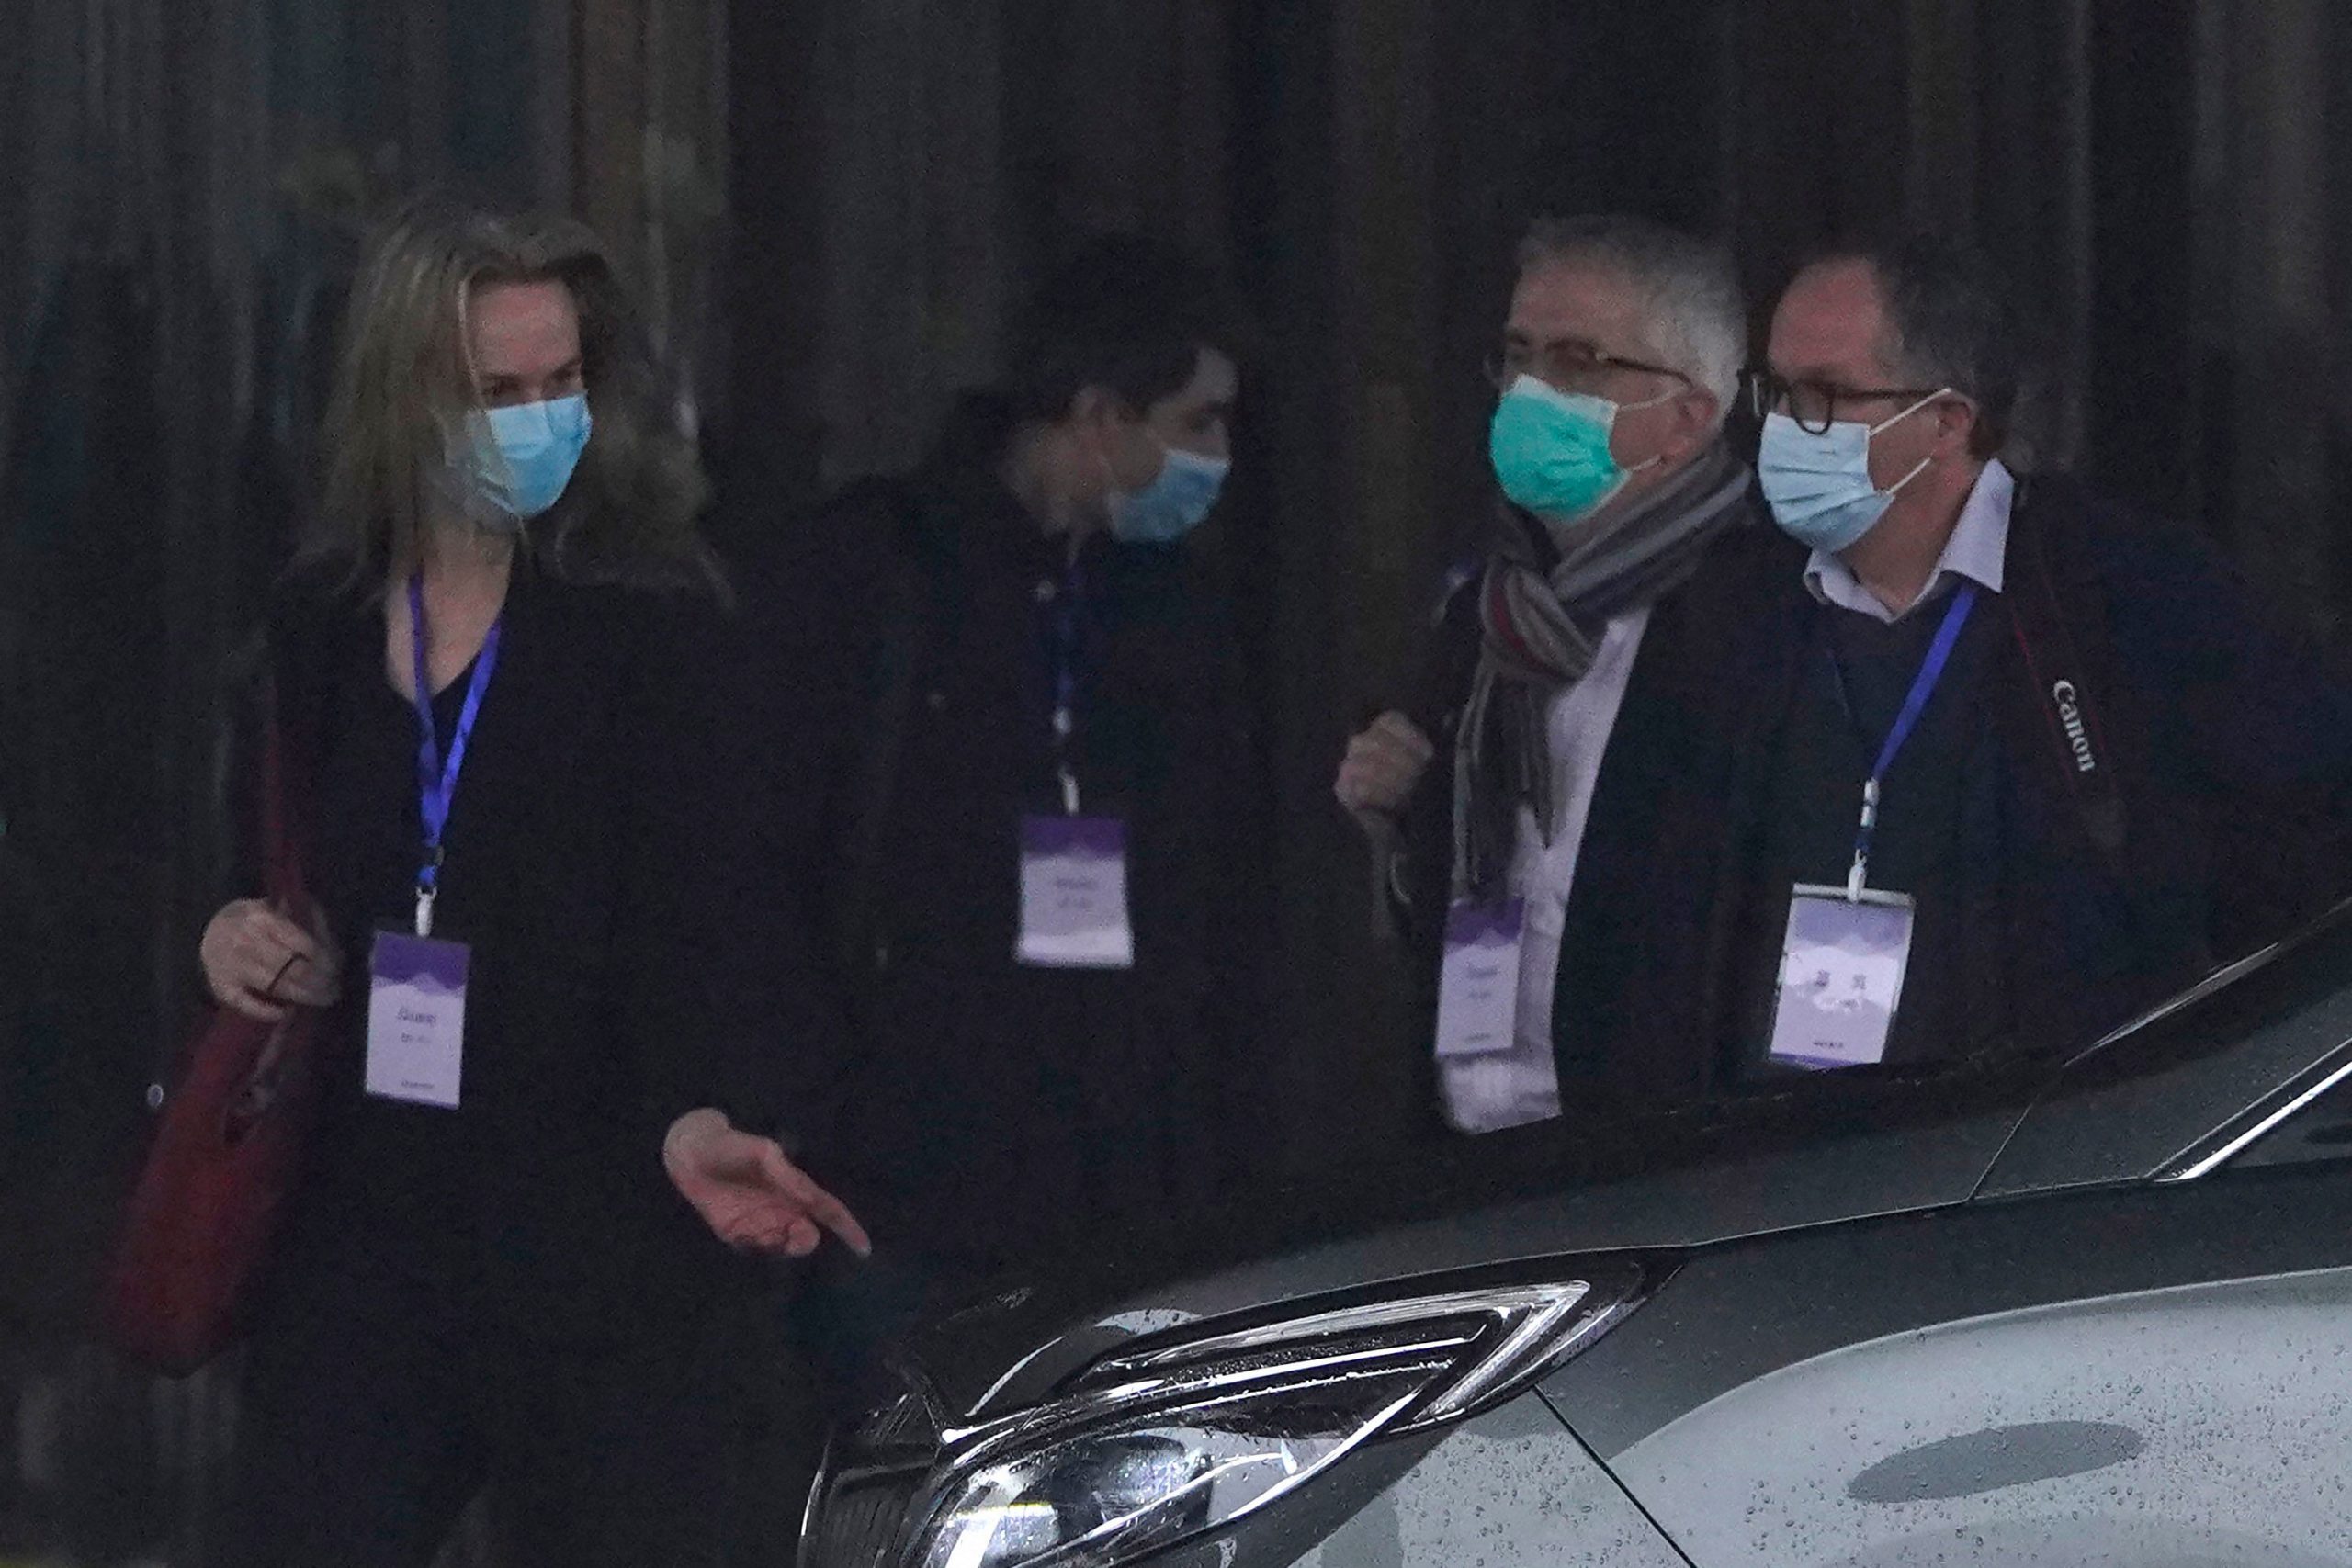 Foreign scientist to work in Wuhan lab prior to COVID outbreak speaks out